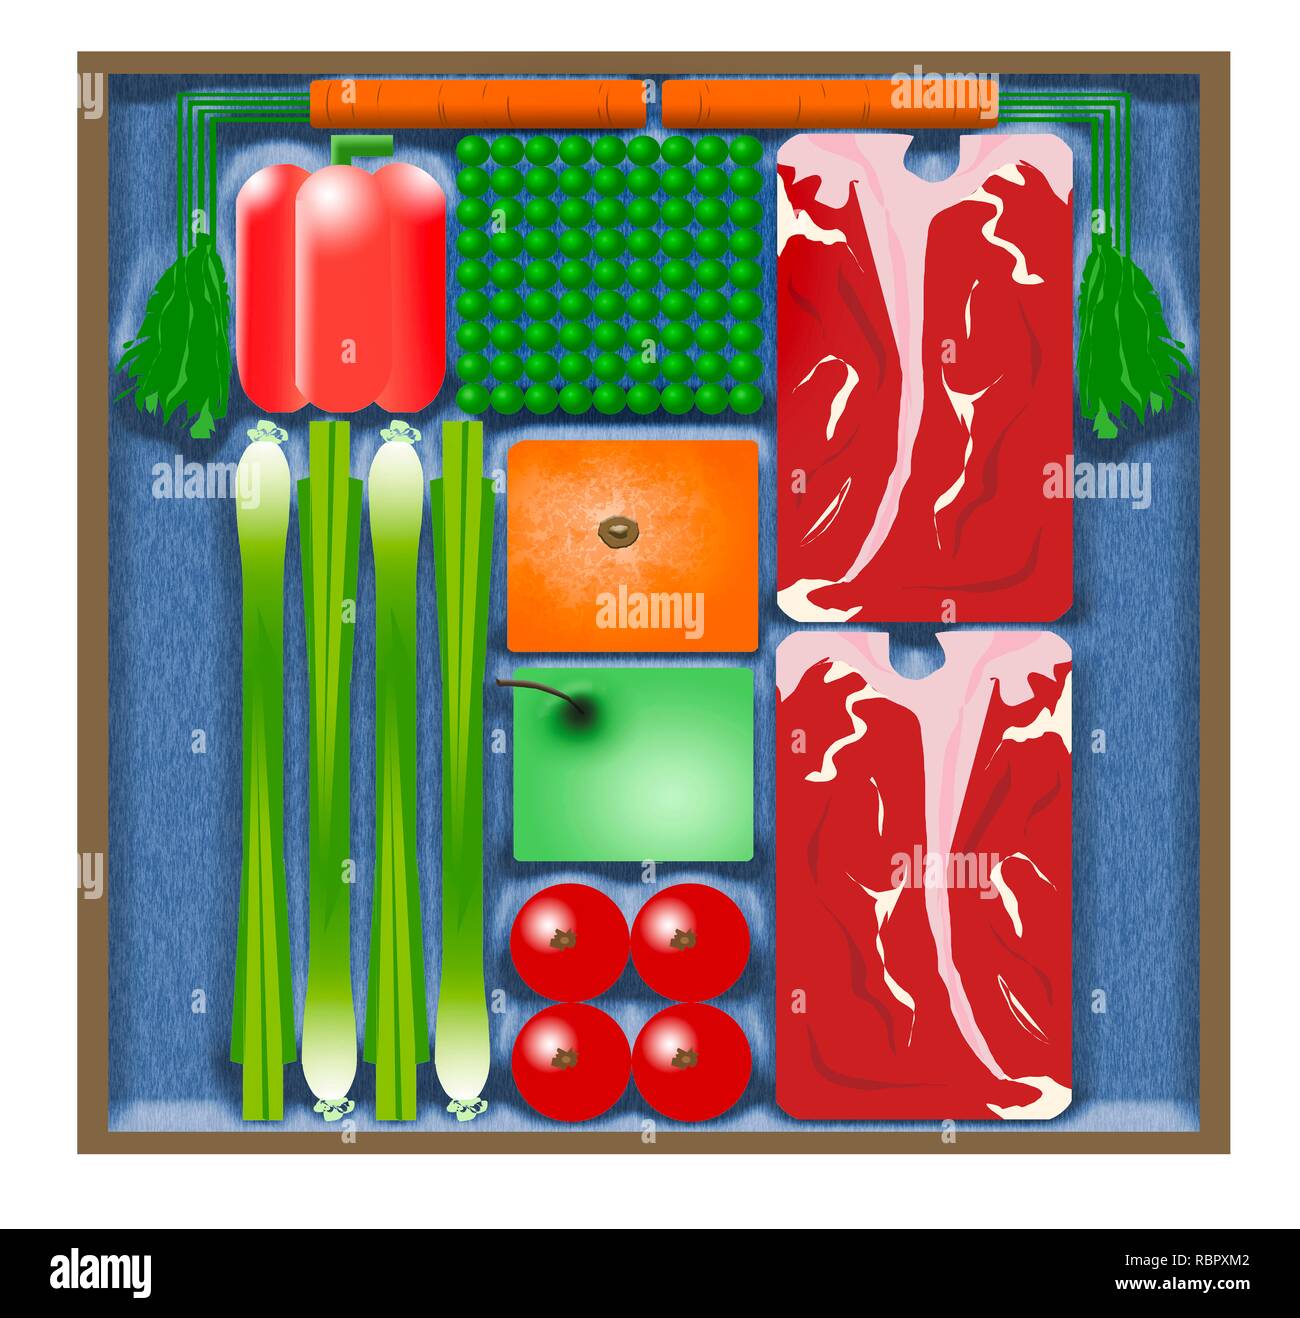 Here is an illustration of pre-packaged cook at home meal kits that are delivered to. your door. It includes steaks, peas, carrots, orange, apple, asp Stock Photo